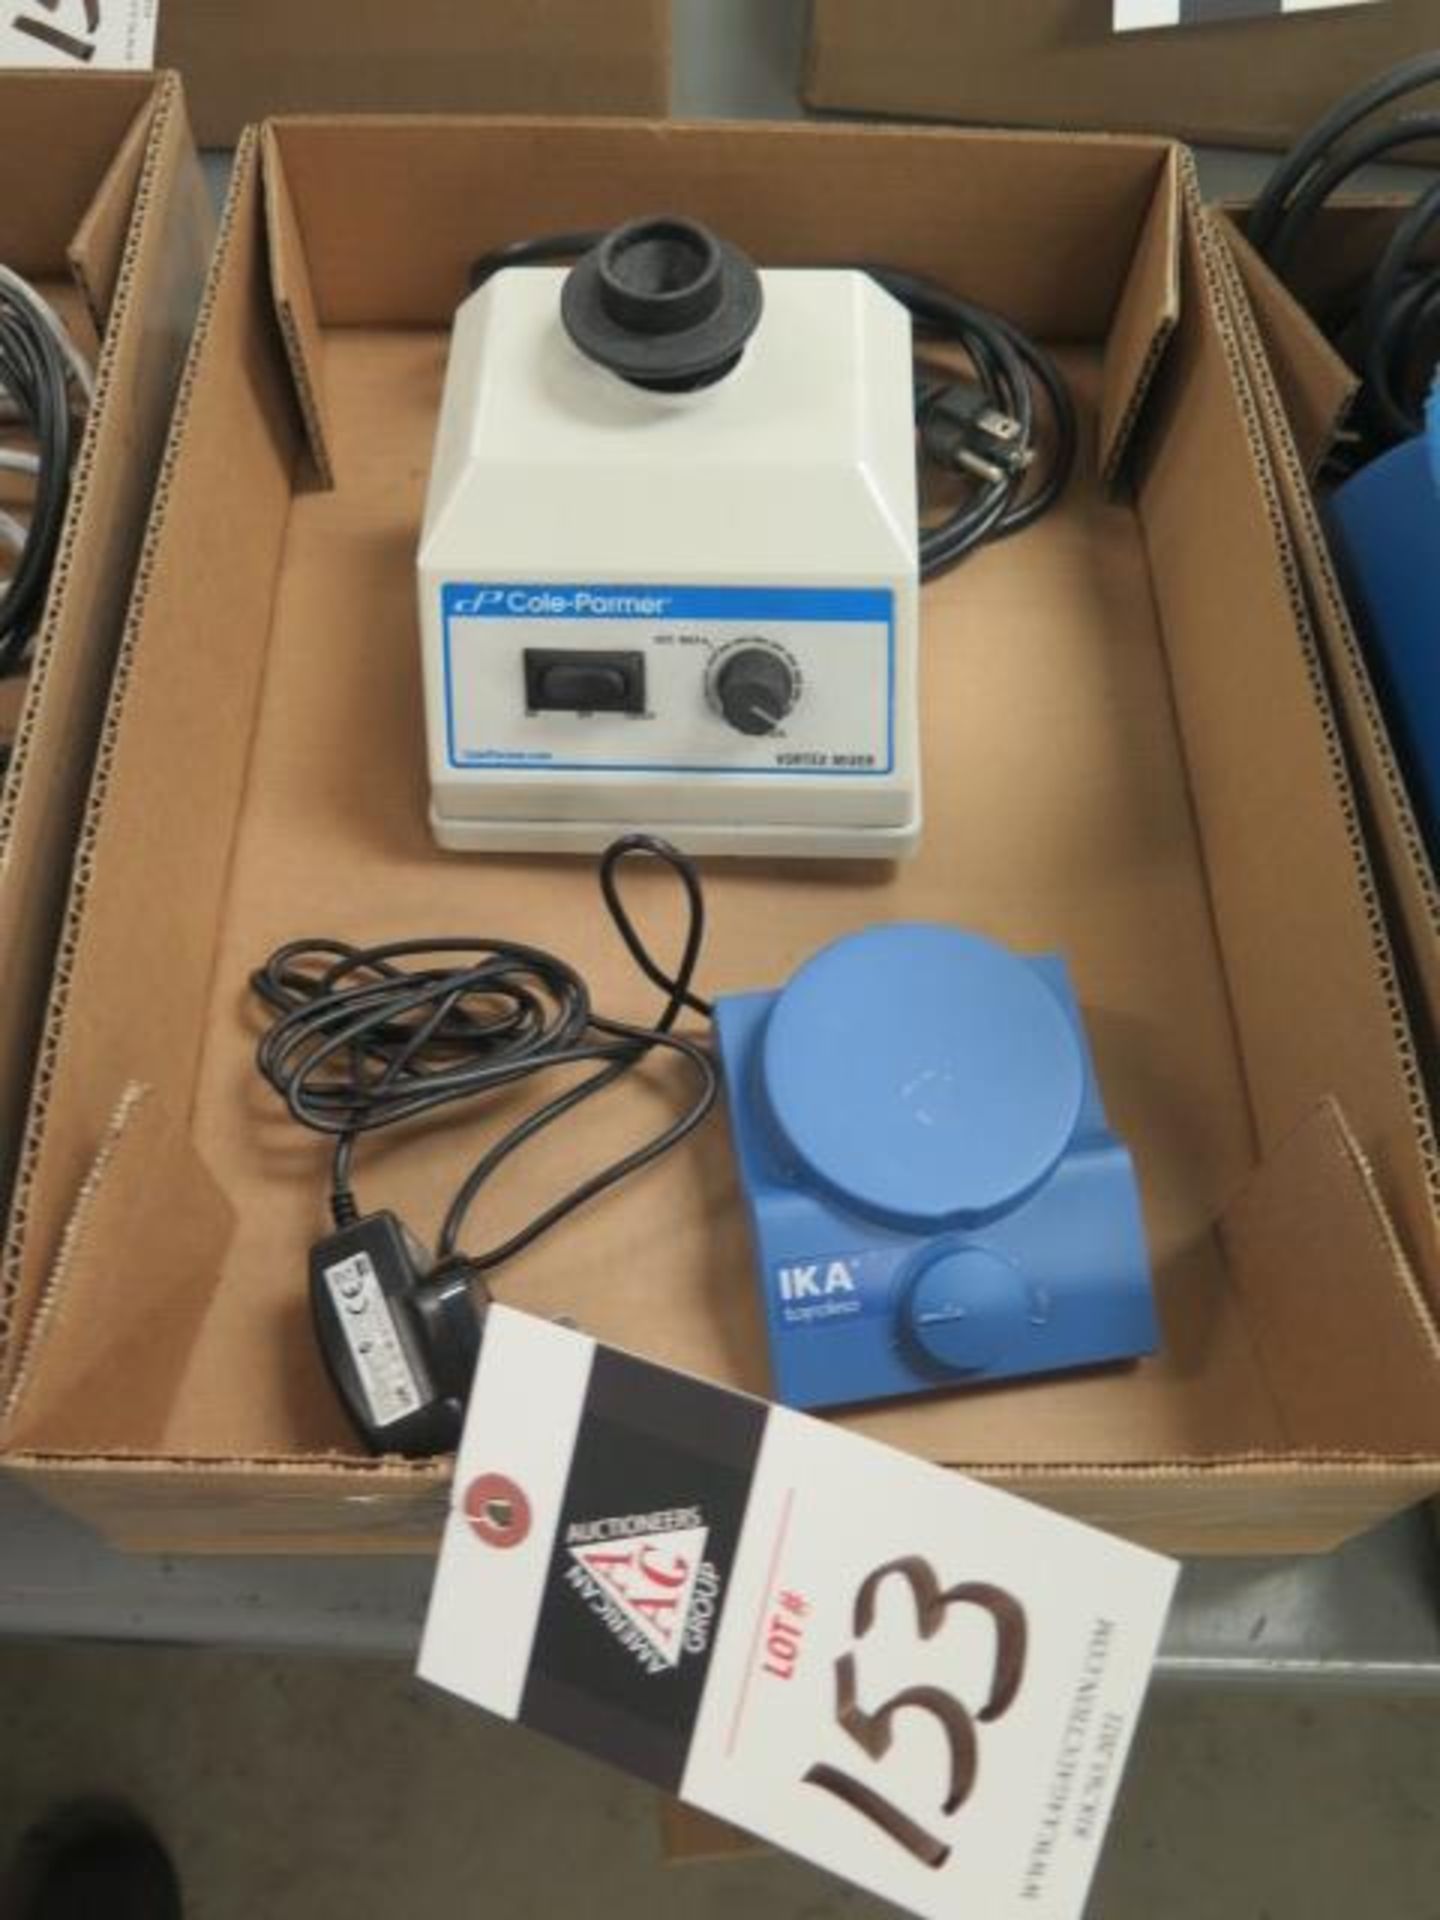 Cole-Parmer Virtex Mixer and IKA Topolino Stirrer, SOLD AS IS AND WITH NO WARRANTY